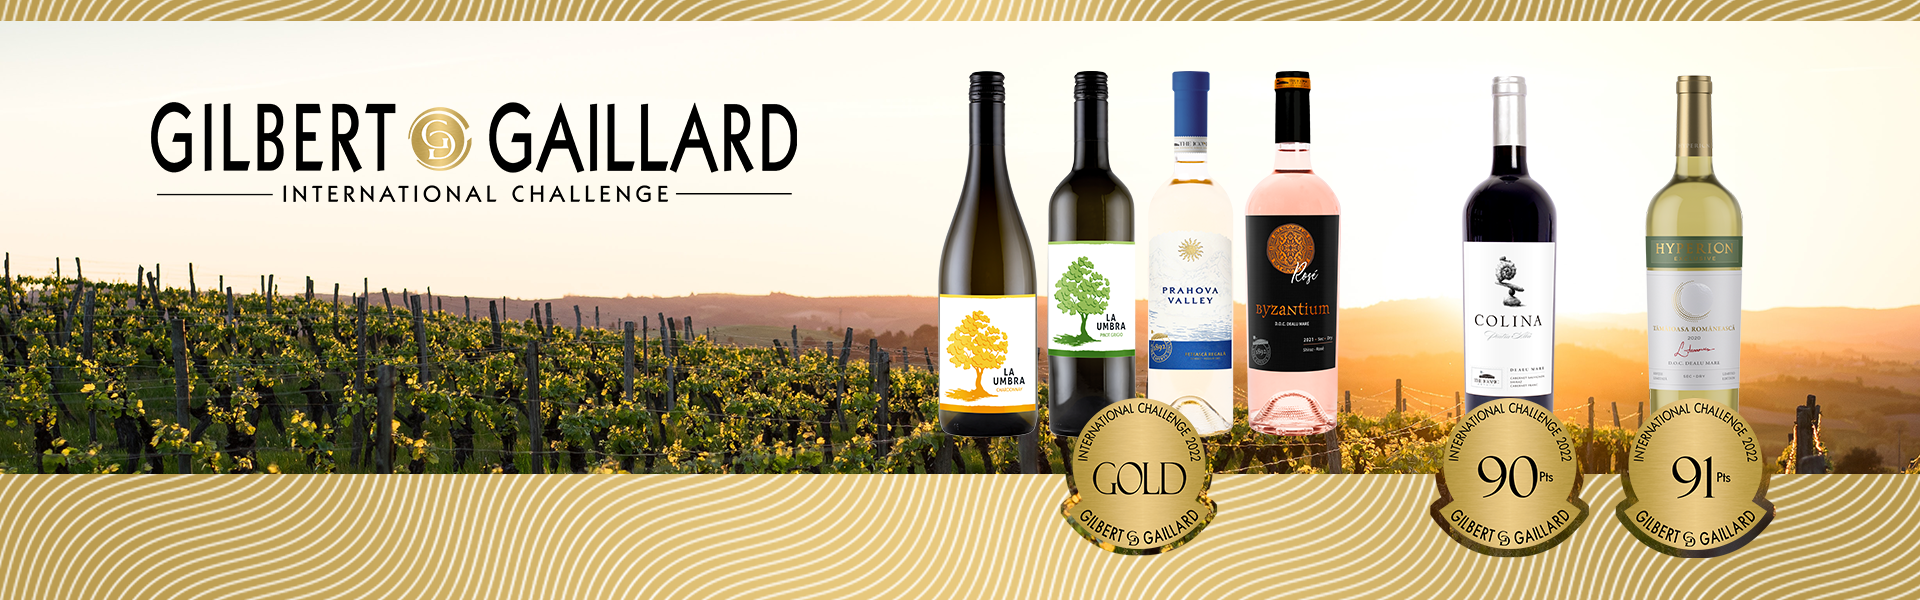 Six gold medals for our wines, awarded at the Gilbert & Gaillard International Challenge 2022